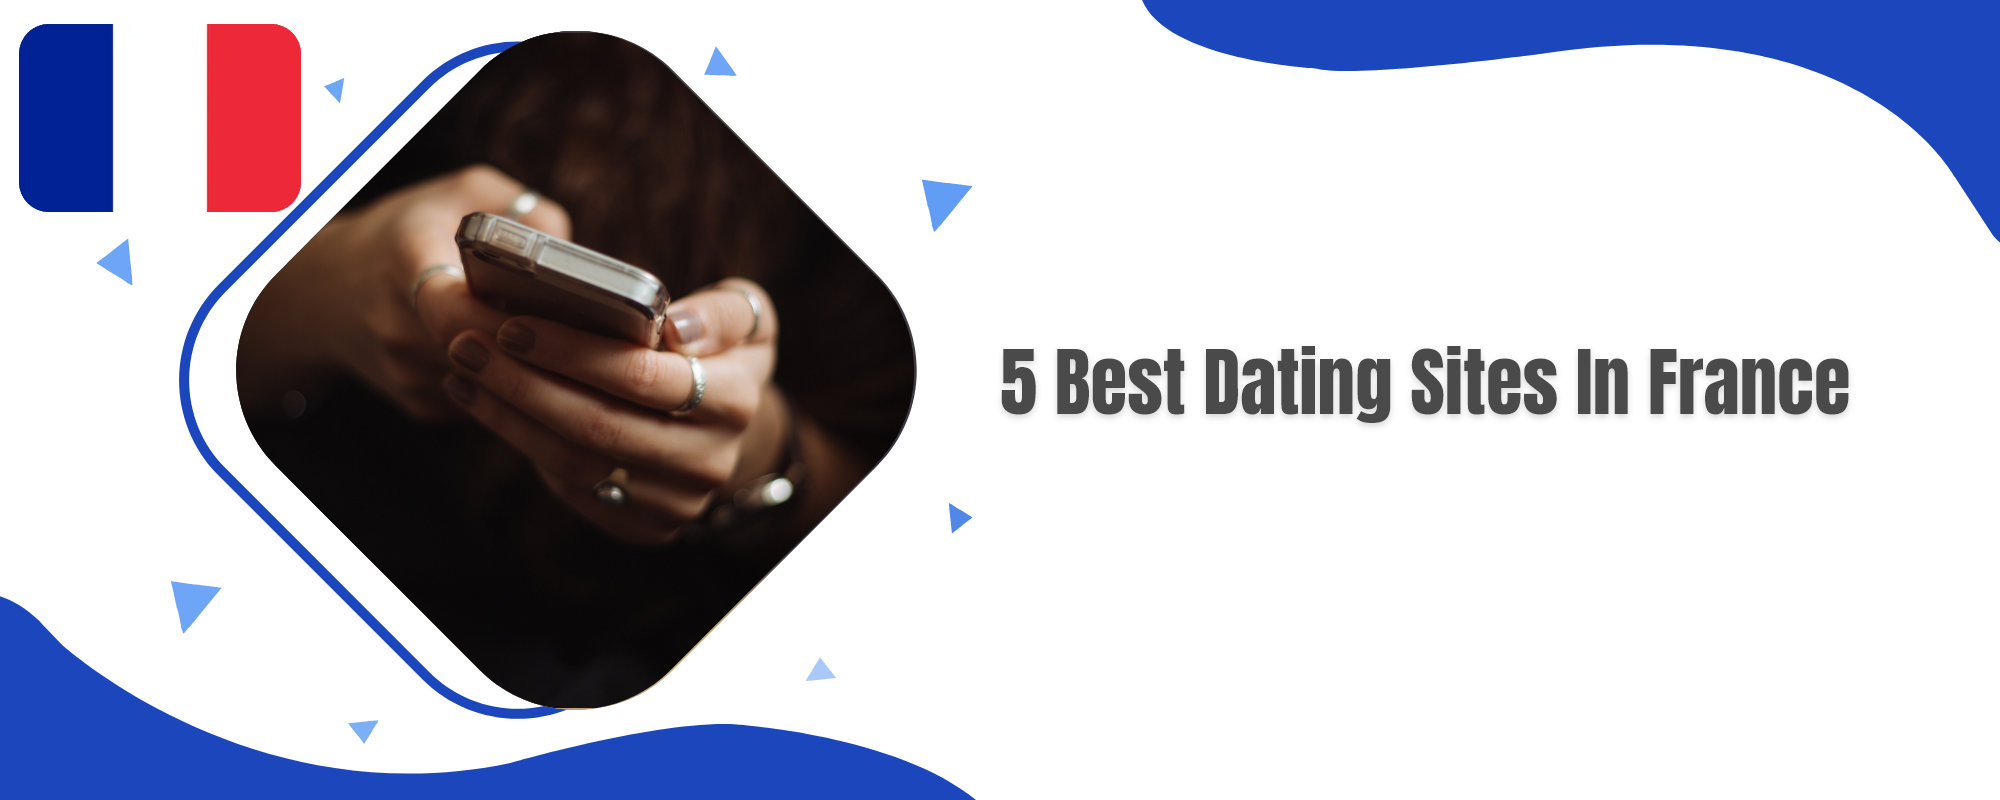 Best dating sites in France